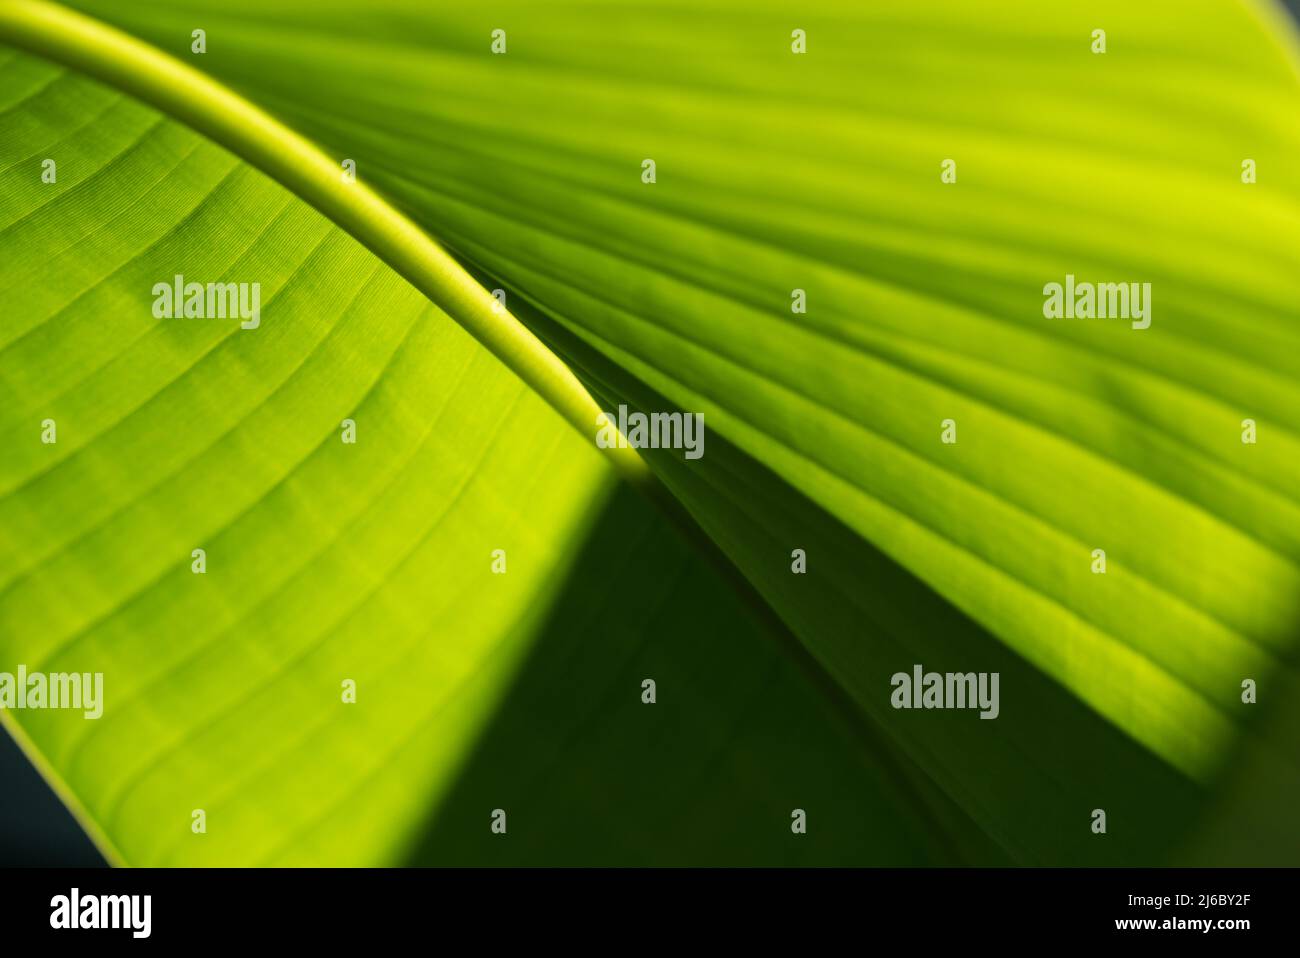 Banana leaves in strong backlight making abstract forms and patterns Stock Photo